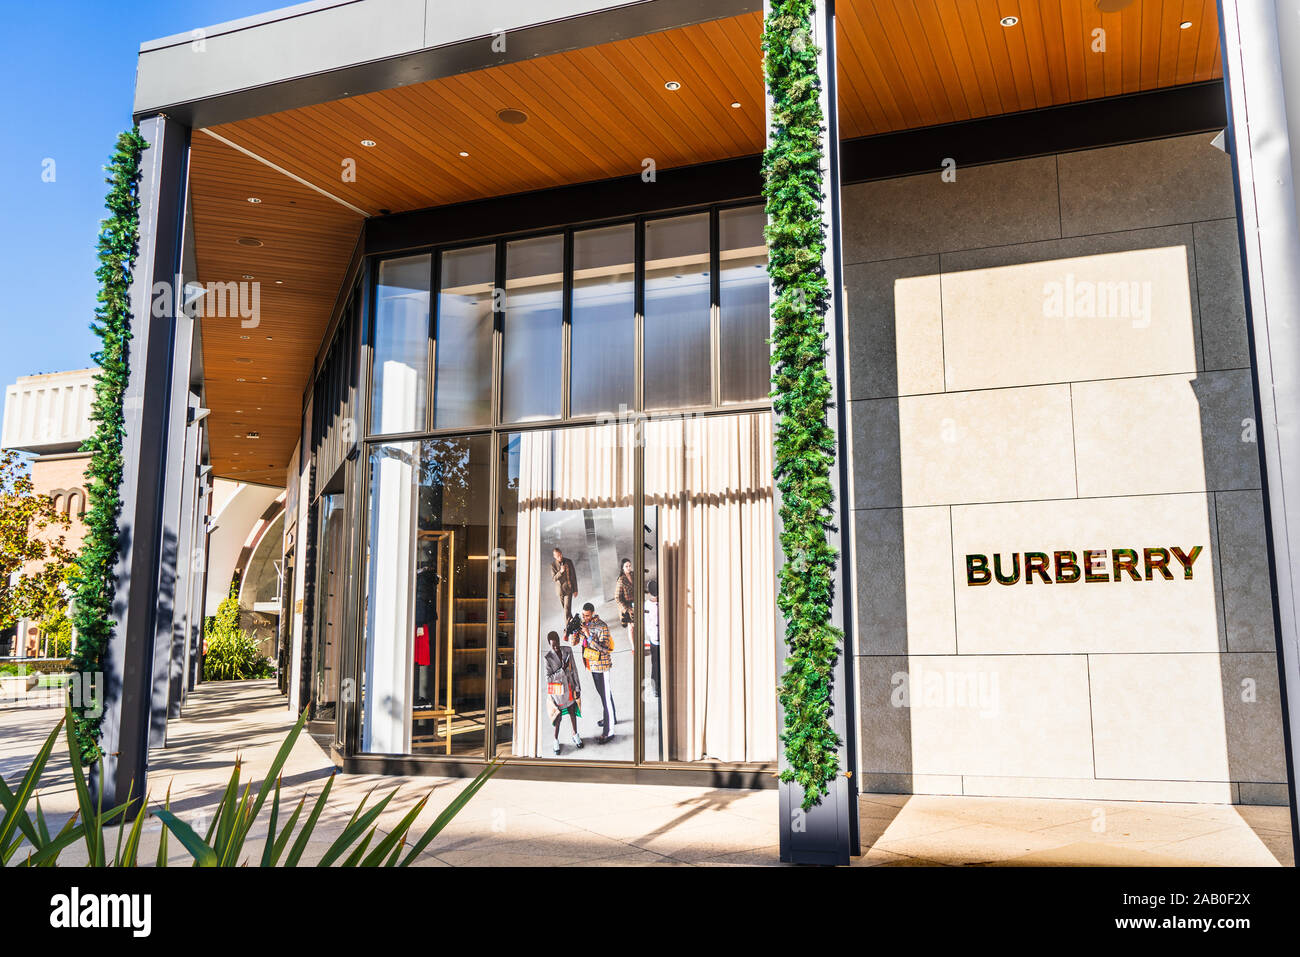 burberry stanford mall